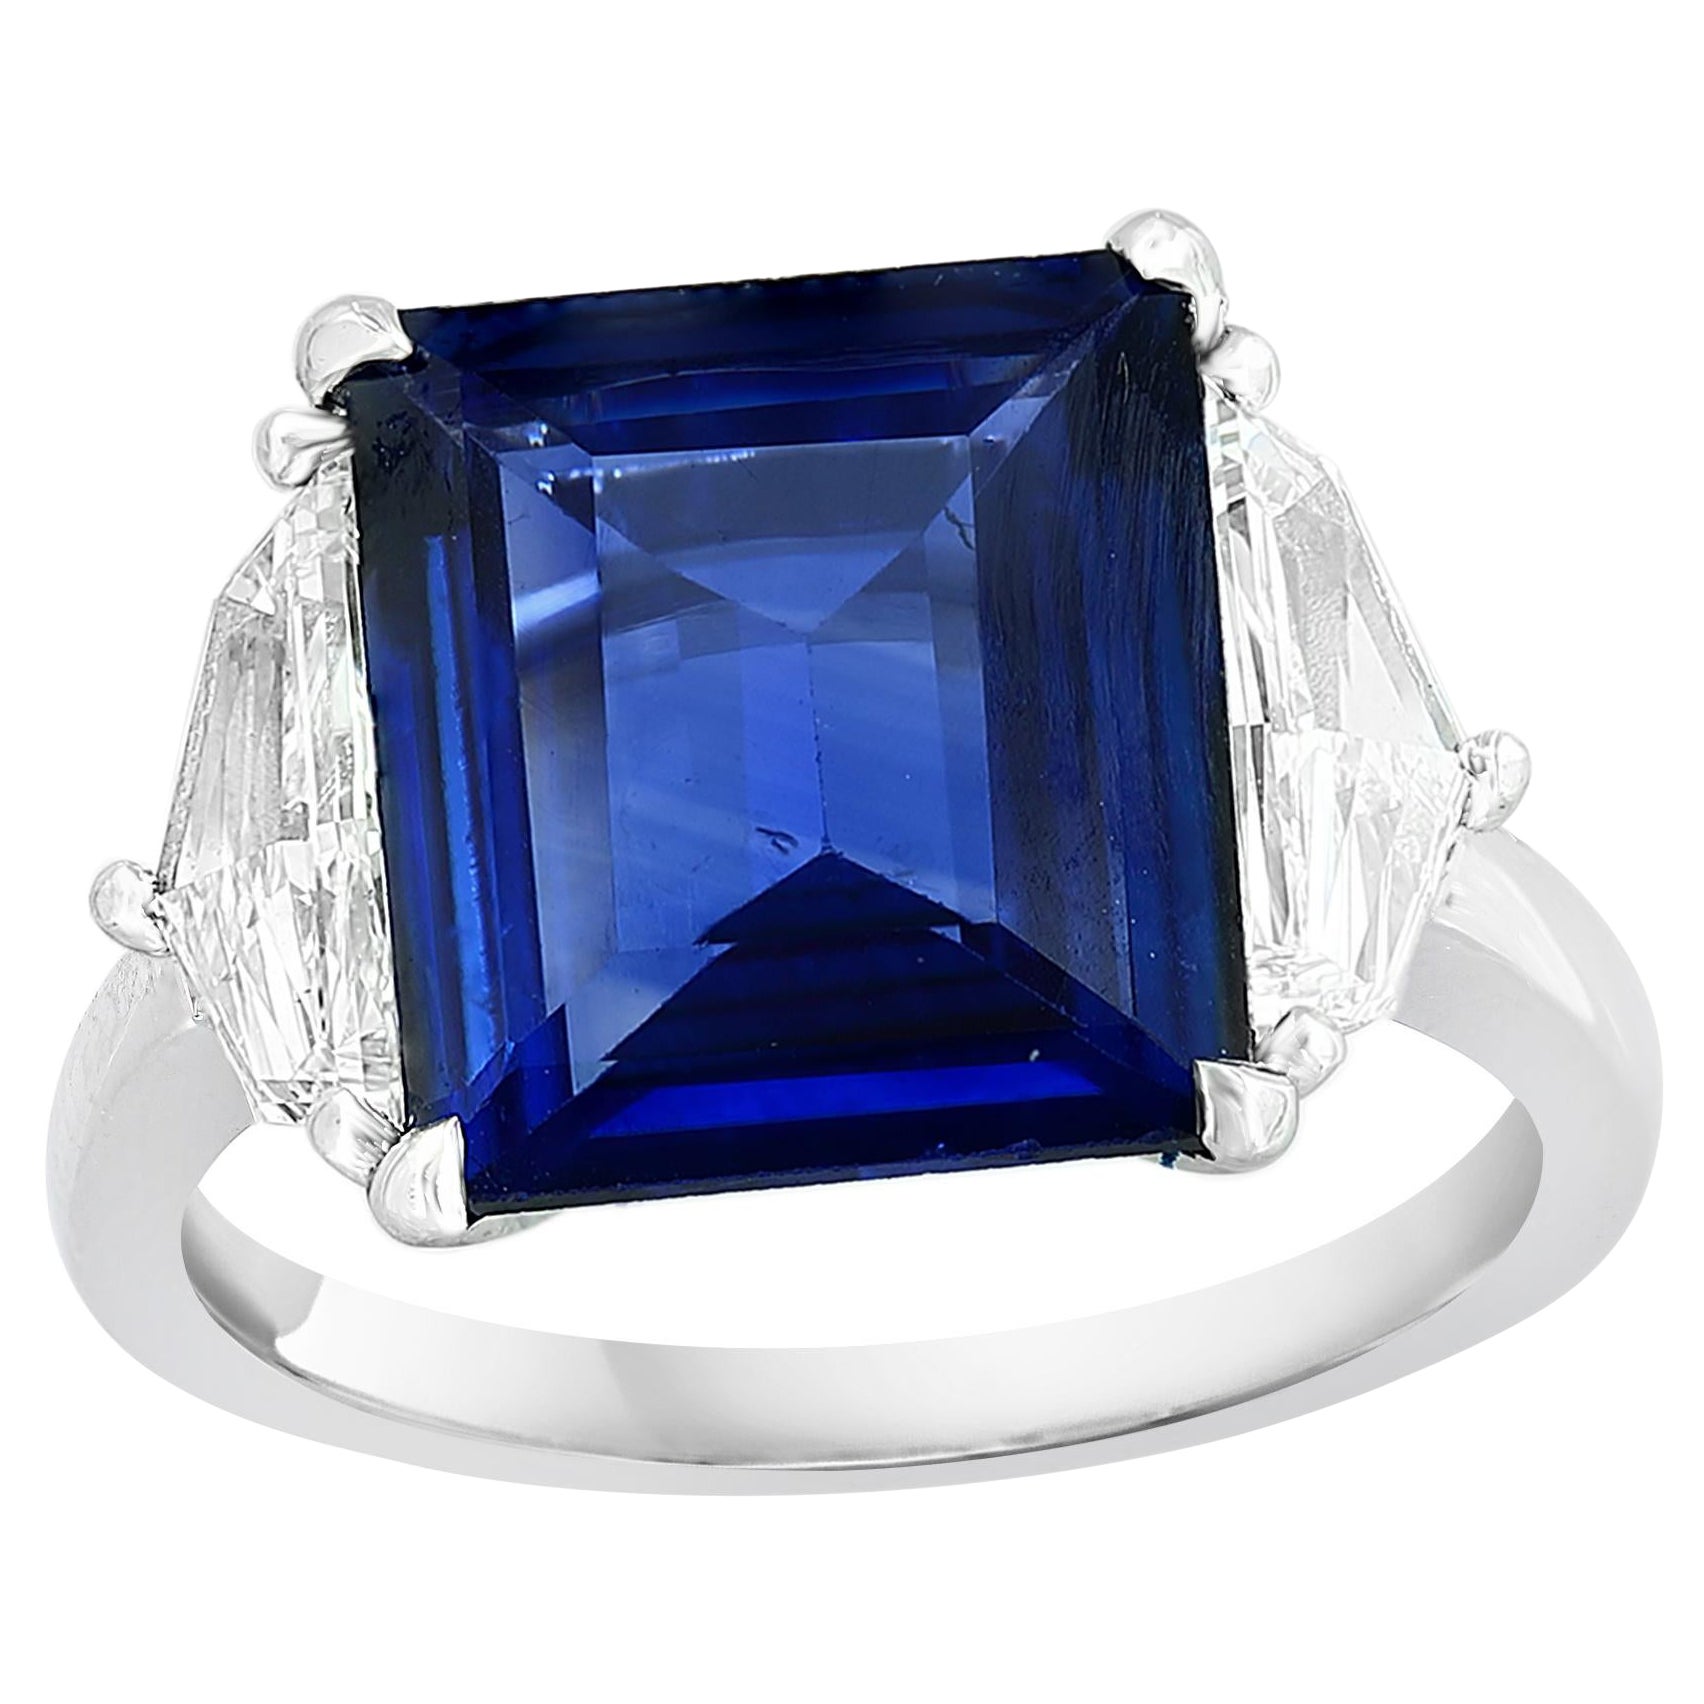 Certified 2.84 Carat Emerald Cut Sapphire & Diamond Engagement Ring in Platinum For Sale